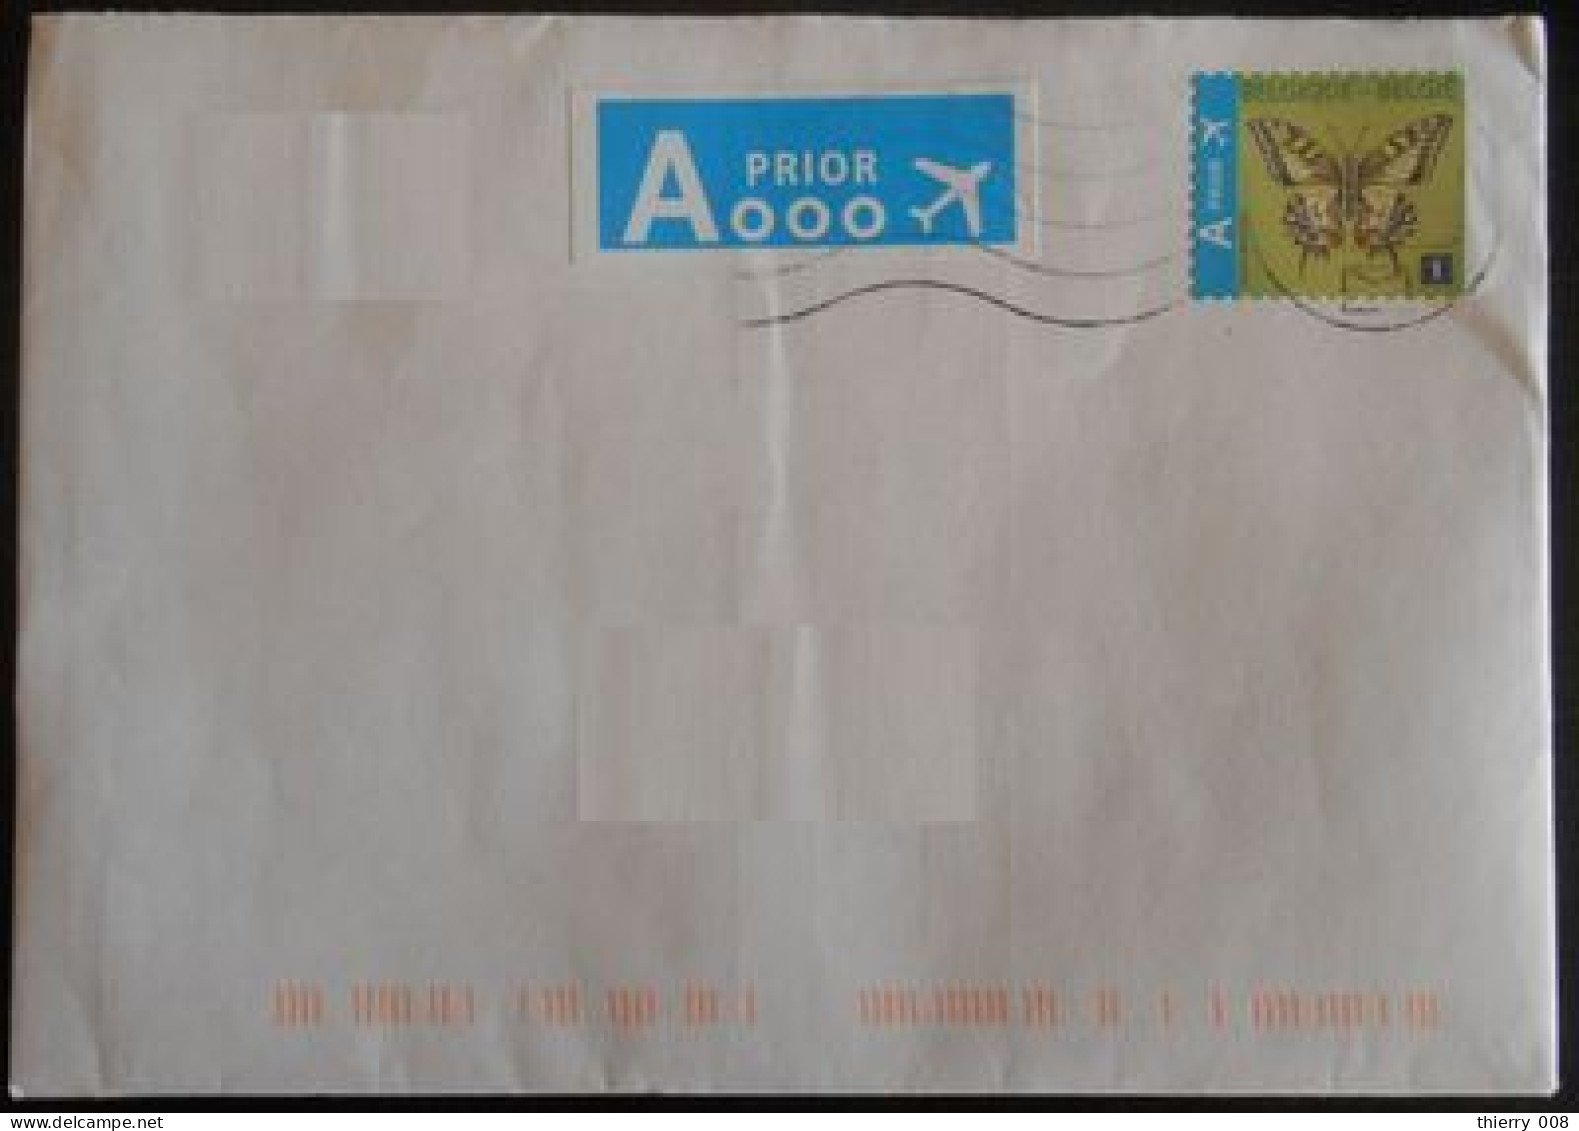 703  Belgique  Enveloppe  Timbre Papillon  Prior - Used Stamps